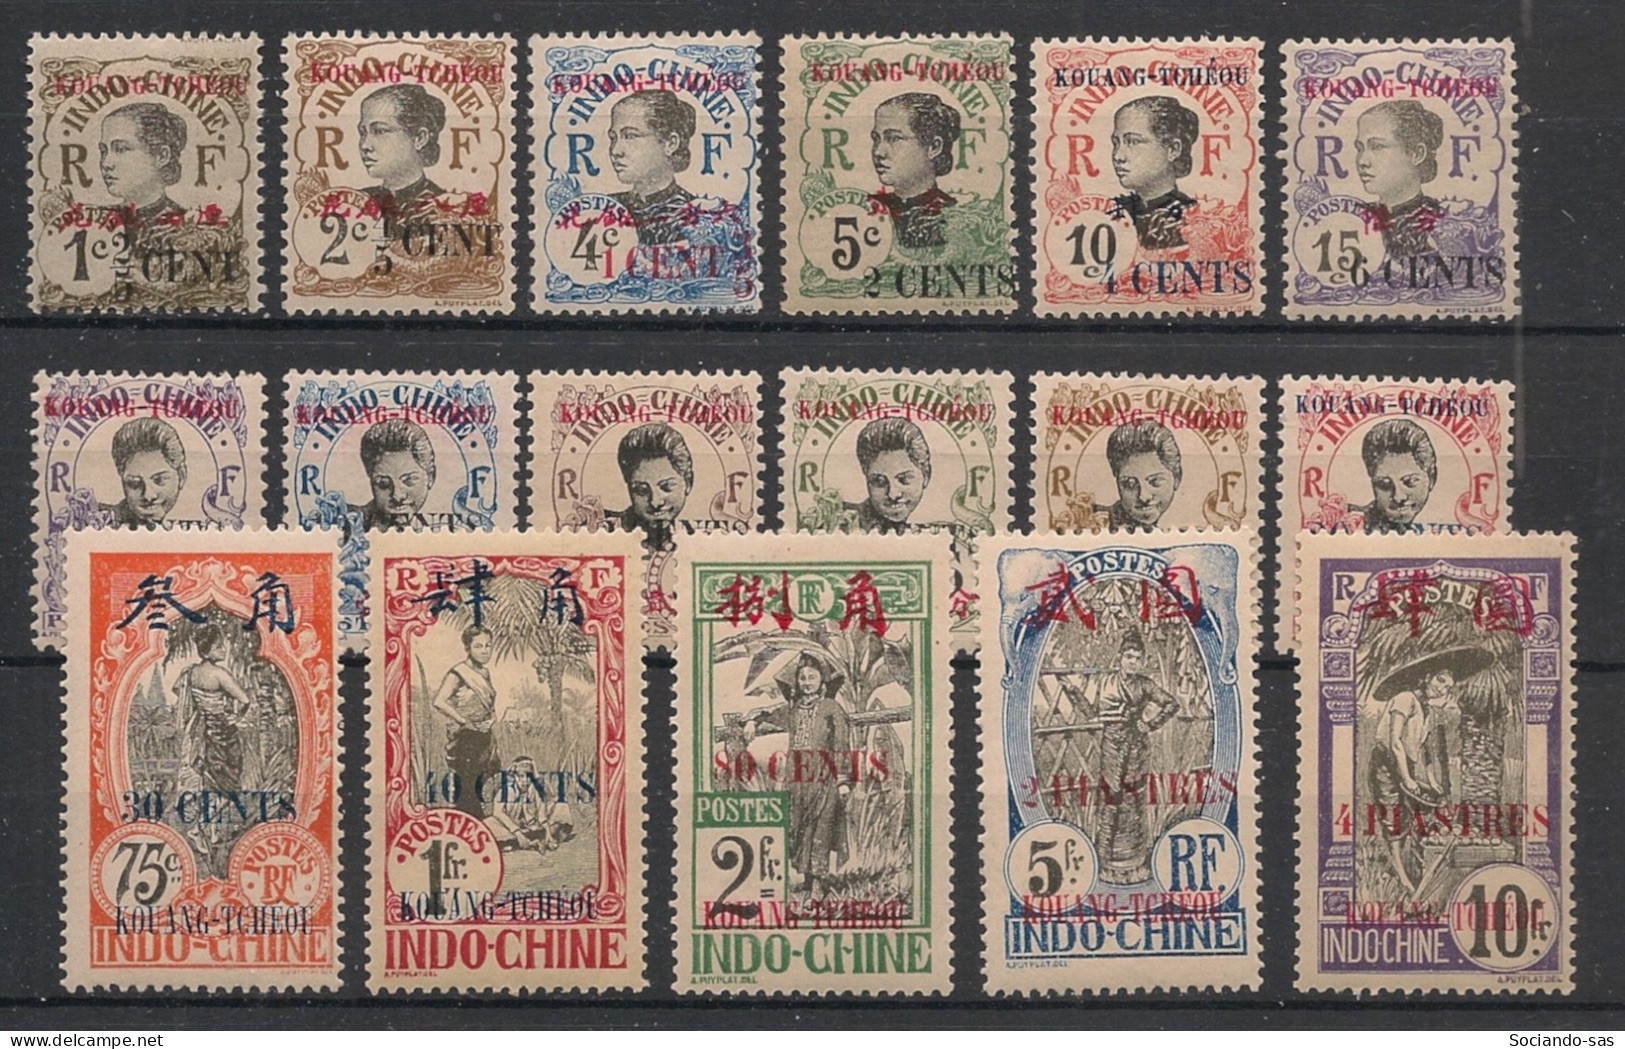 KOUANG-TCHEOU - 1919 - N°YT. 35 à 51 - Type Annamite - Série Complète - Neuf * / MH VF - Unused Stamps